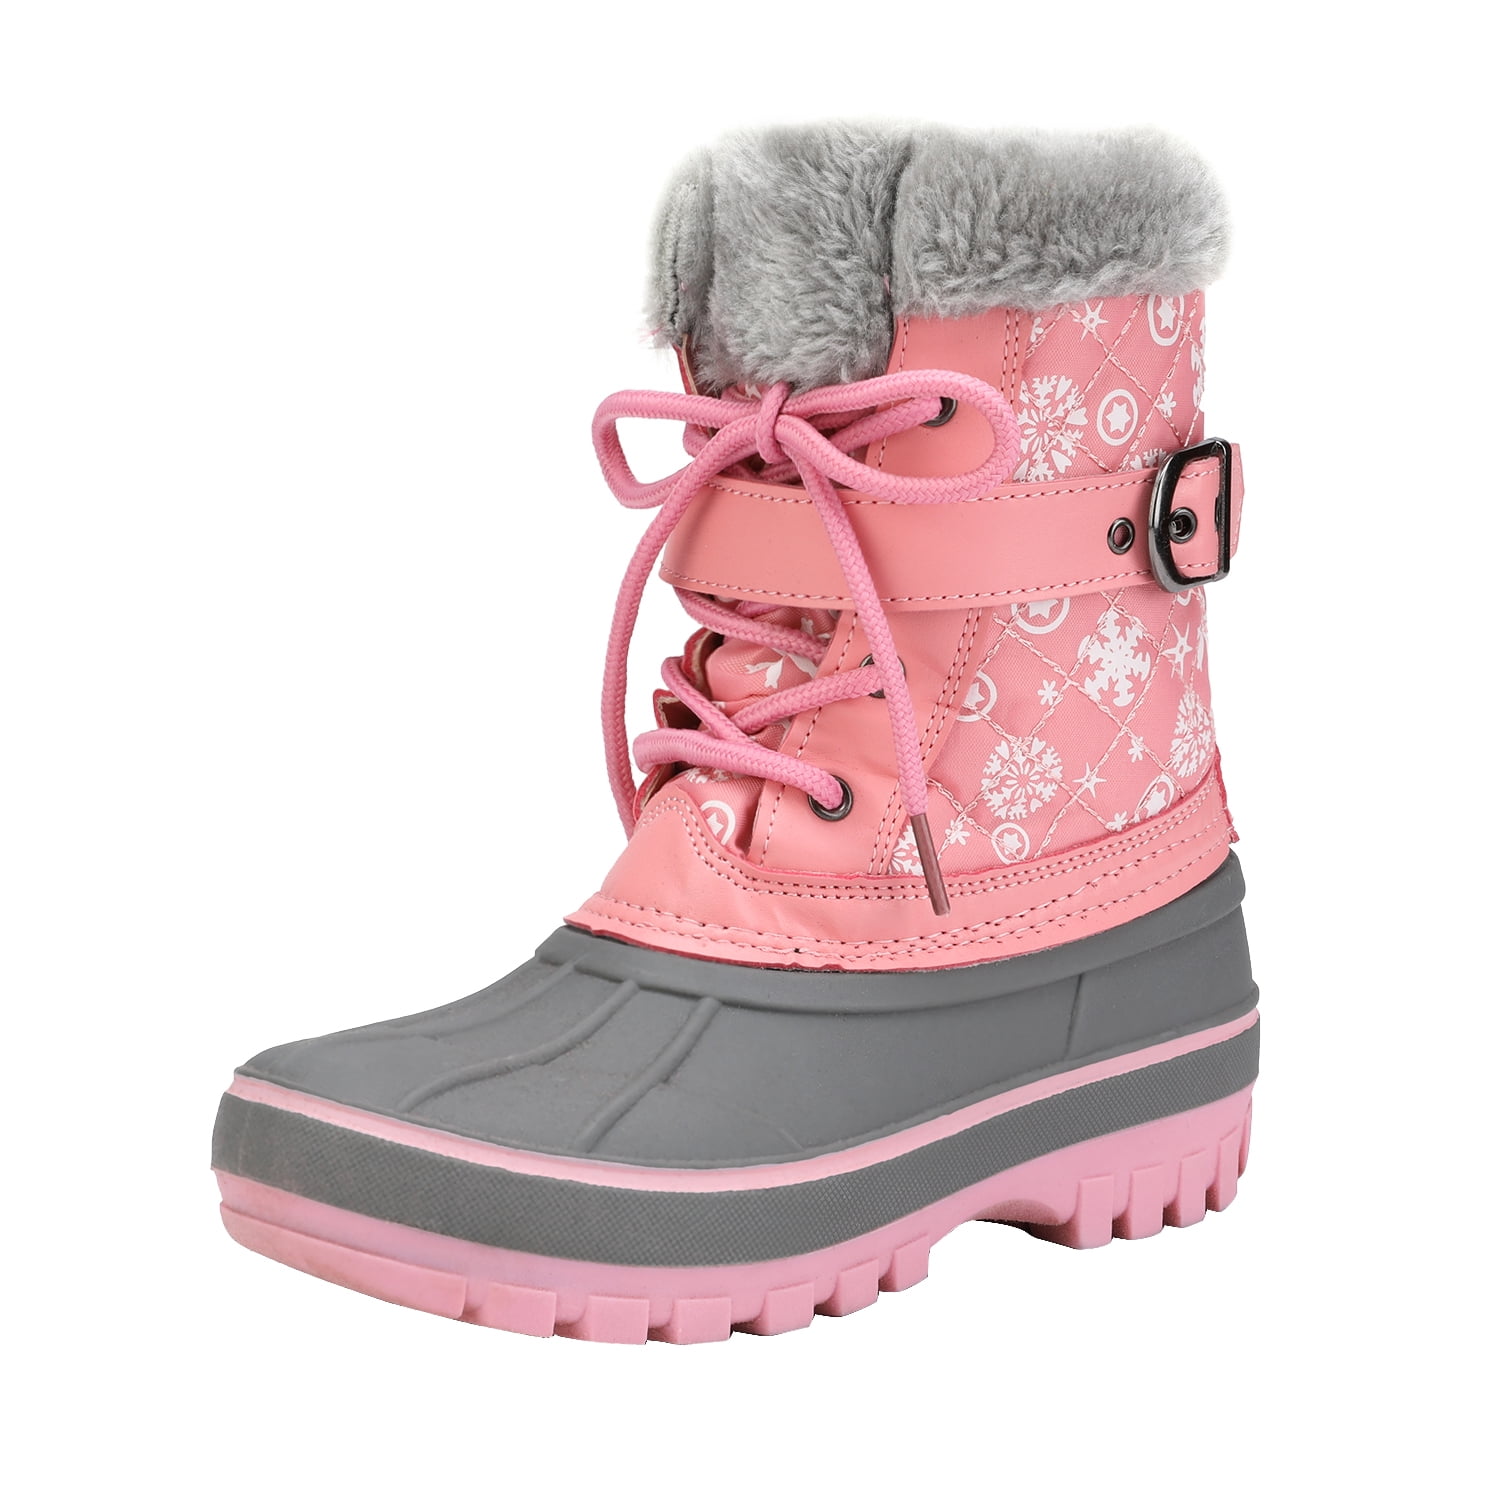 New Toddler Youth Girls Print Chalet Winter Boots Shoes SZ 7 8 9 10 11 12 13 1 2 